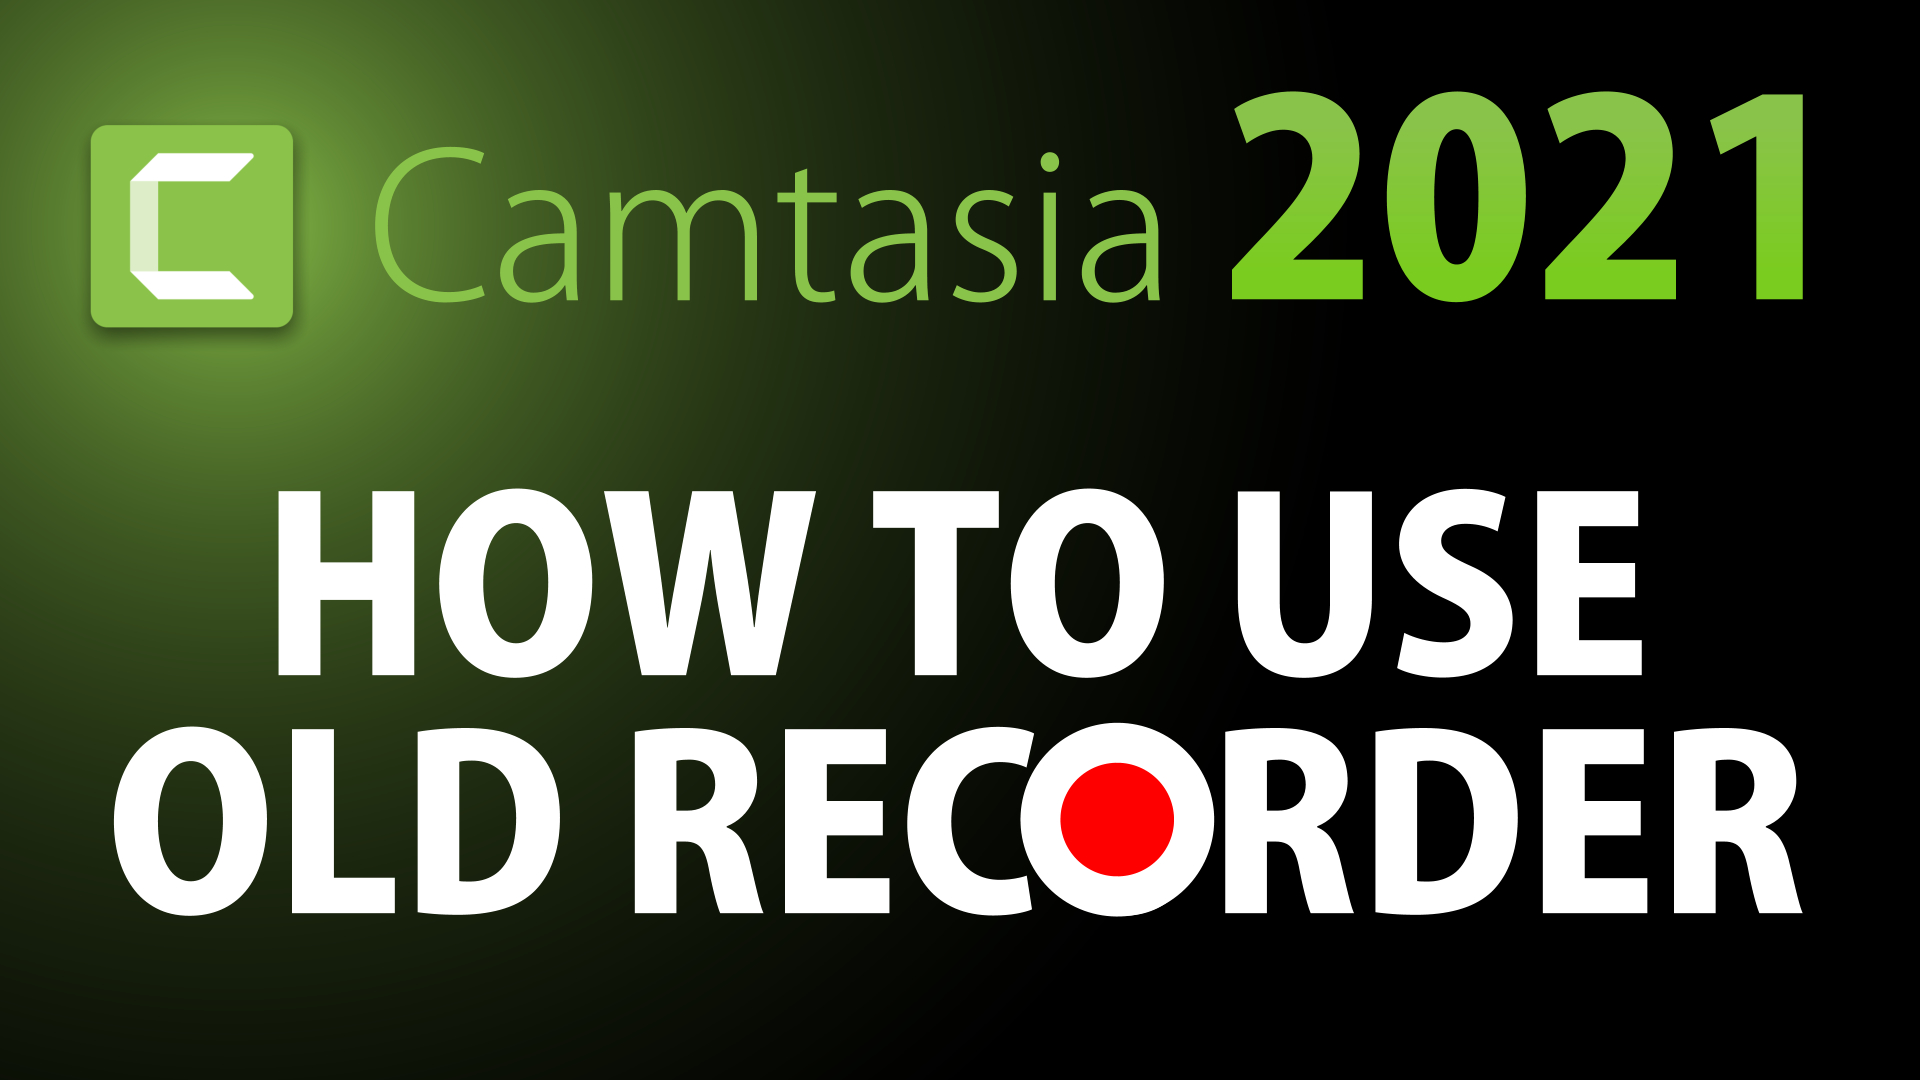 How to use the OLD RECORDER in Camtasia 2021